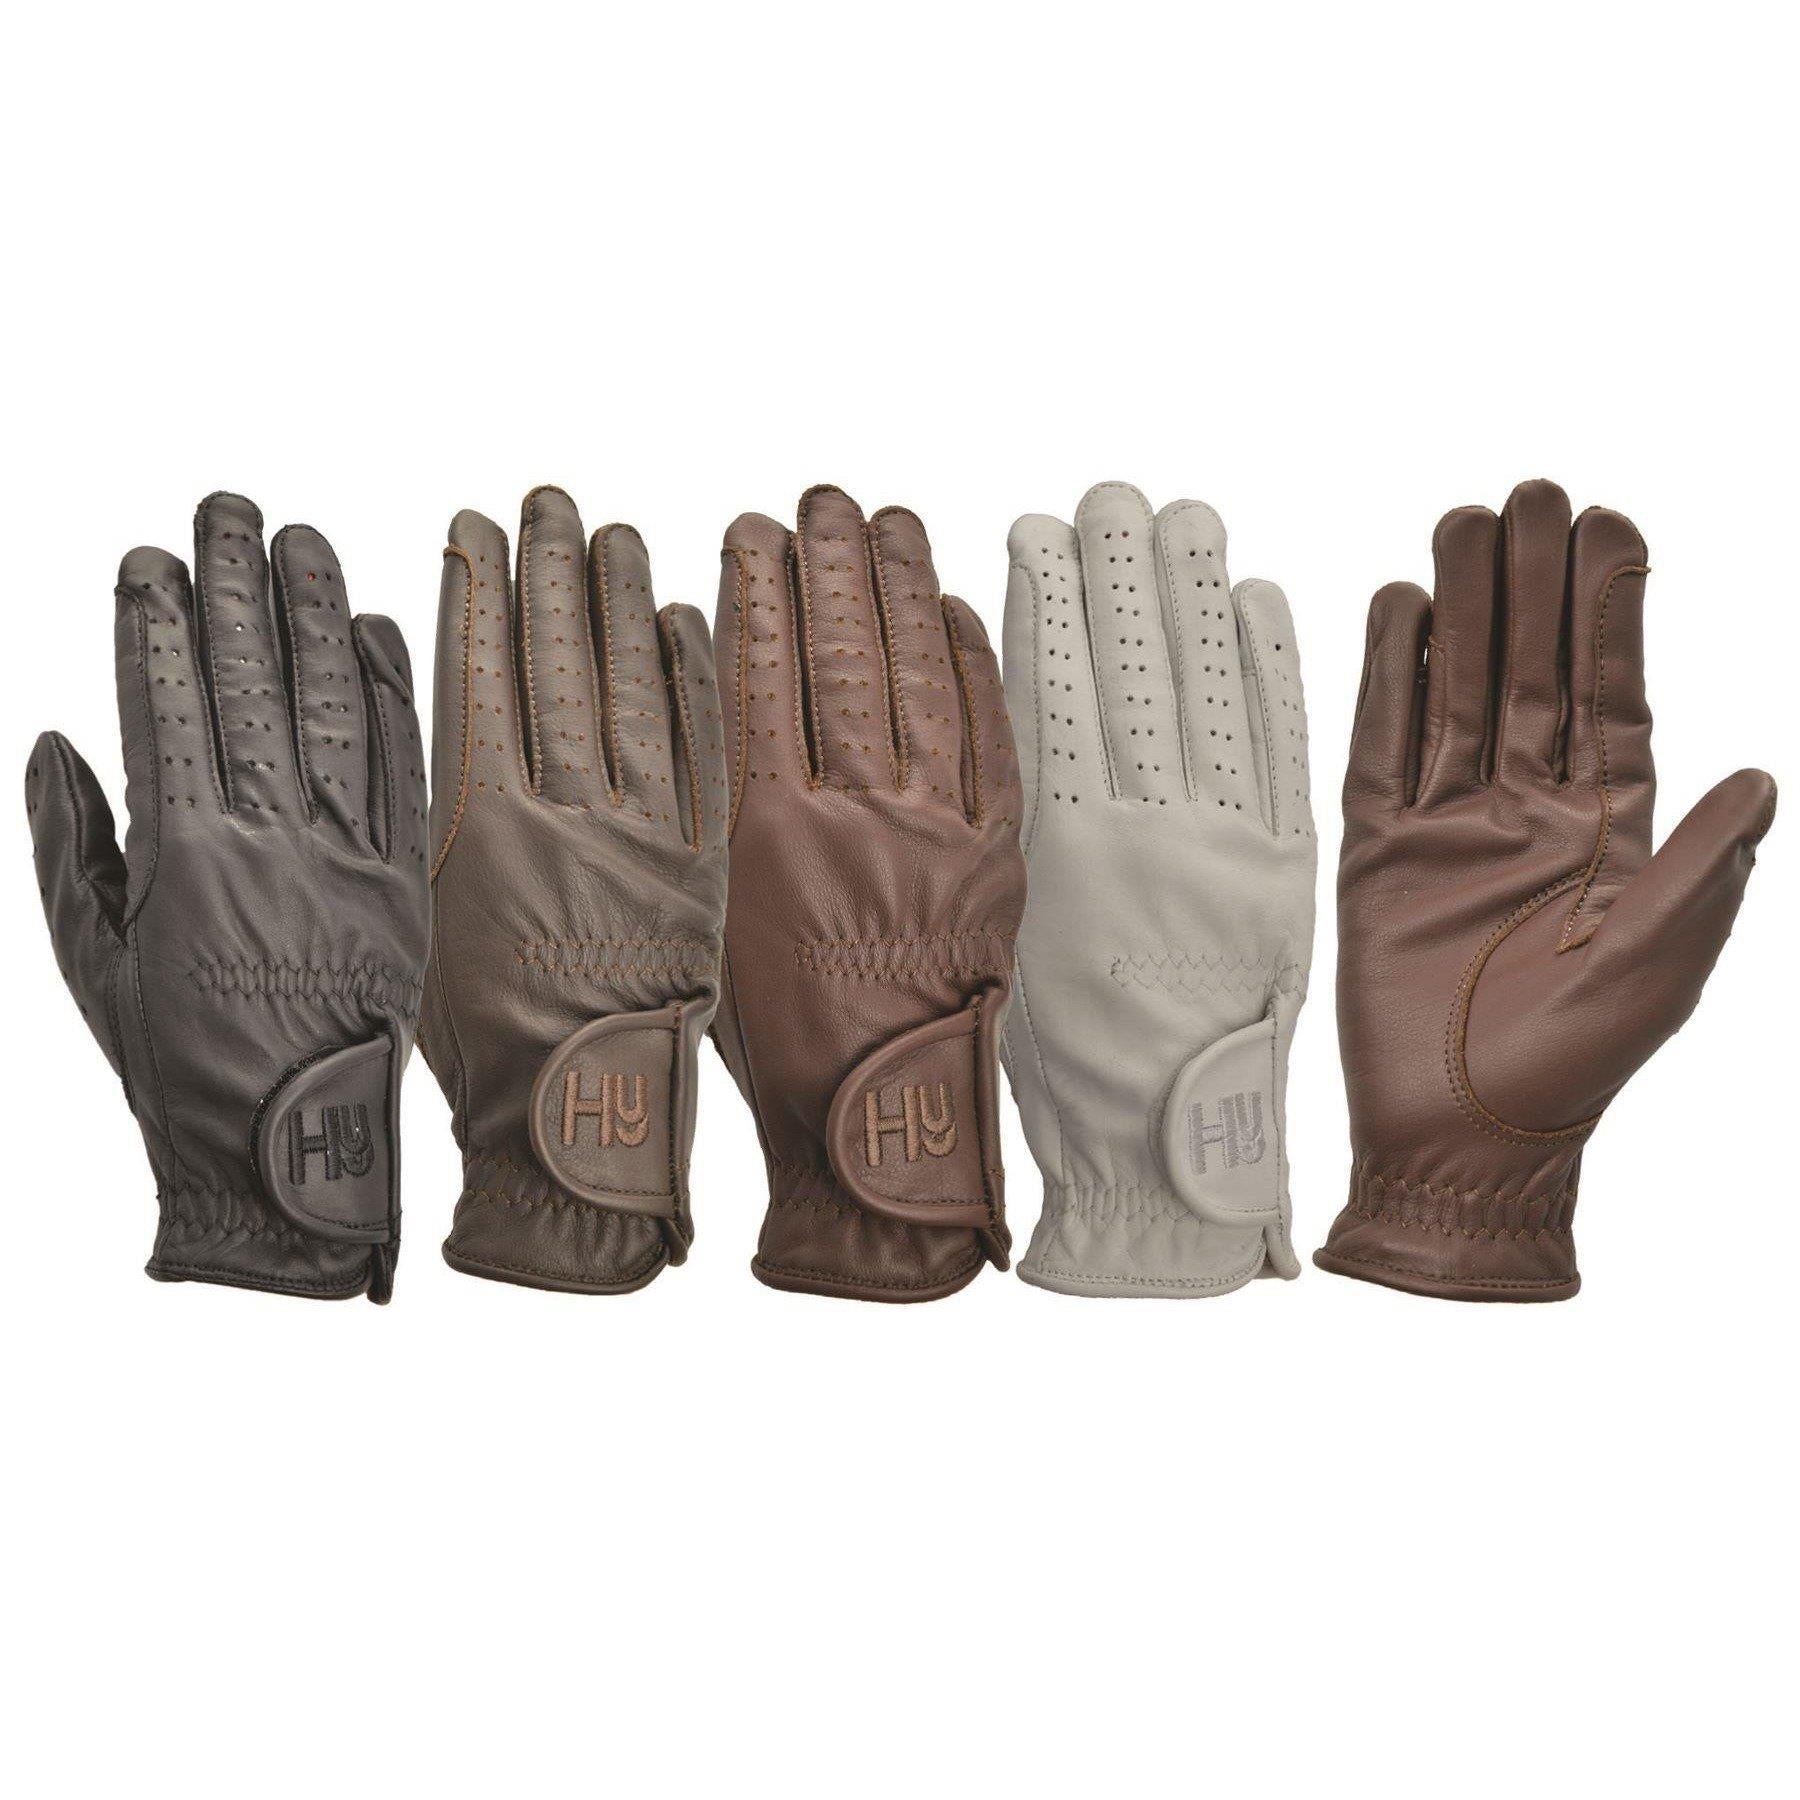 Hy5 Childrens Leather Horse Riding Gloves - Just Horse Riders